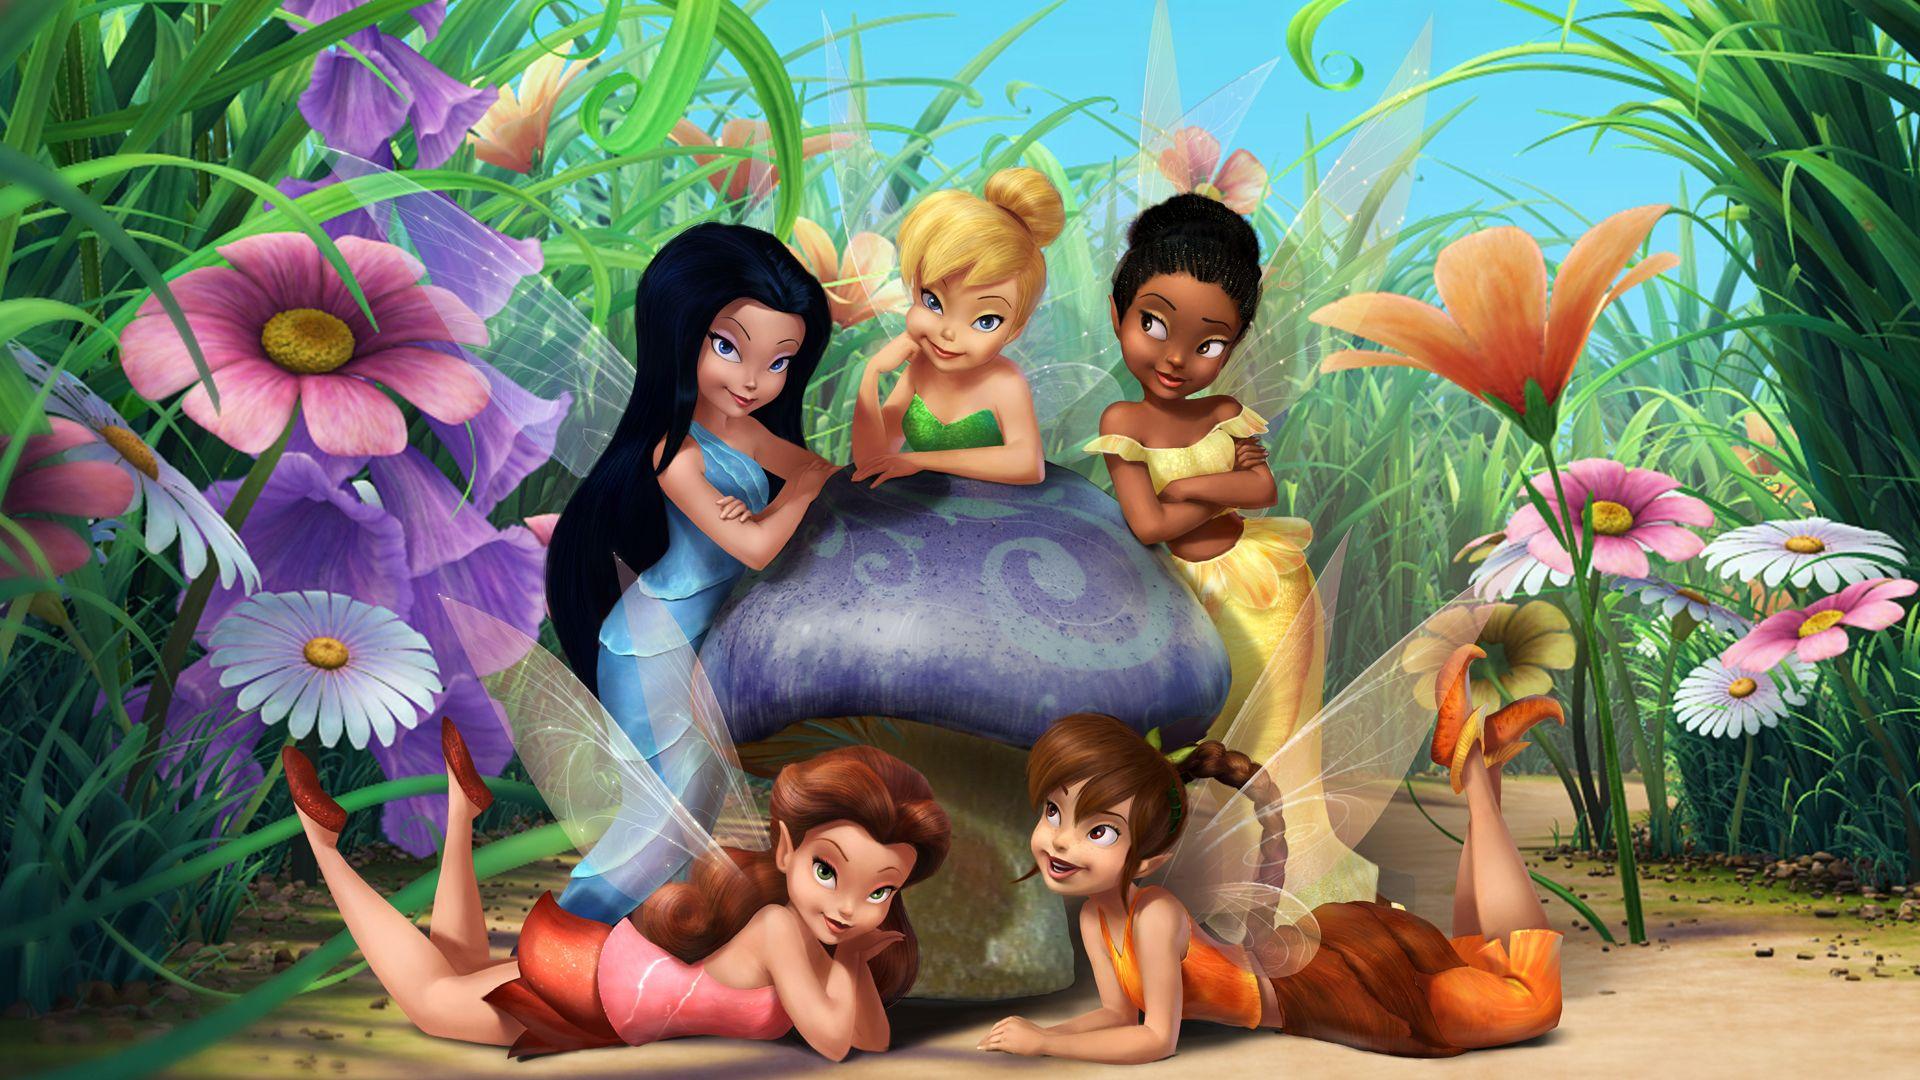 Wallpapers Tinkerbell - Wallpaper Cave